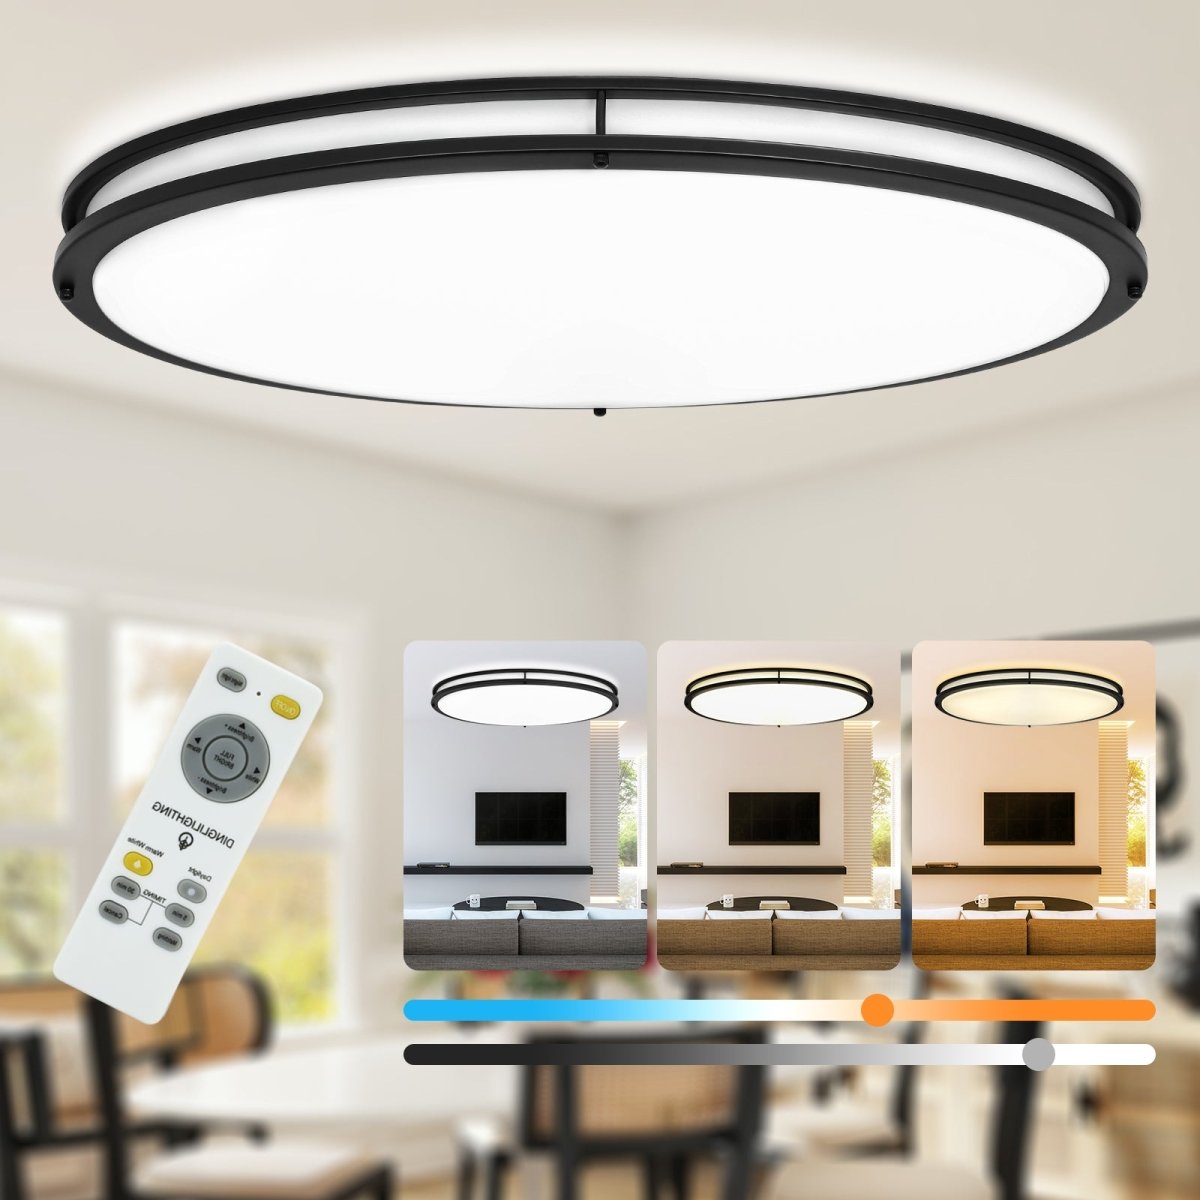 DLLT 65W Dimmable LED Flush Mount Ceiling Light with Remote, 32" Oval Brush Nickel Finish Close to Ceiling Light Fixture for Bedroom/Living Room/Kitchen Lighting, 3CCT Adjustable - 1 | DEPULEY